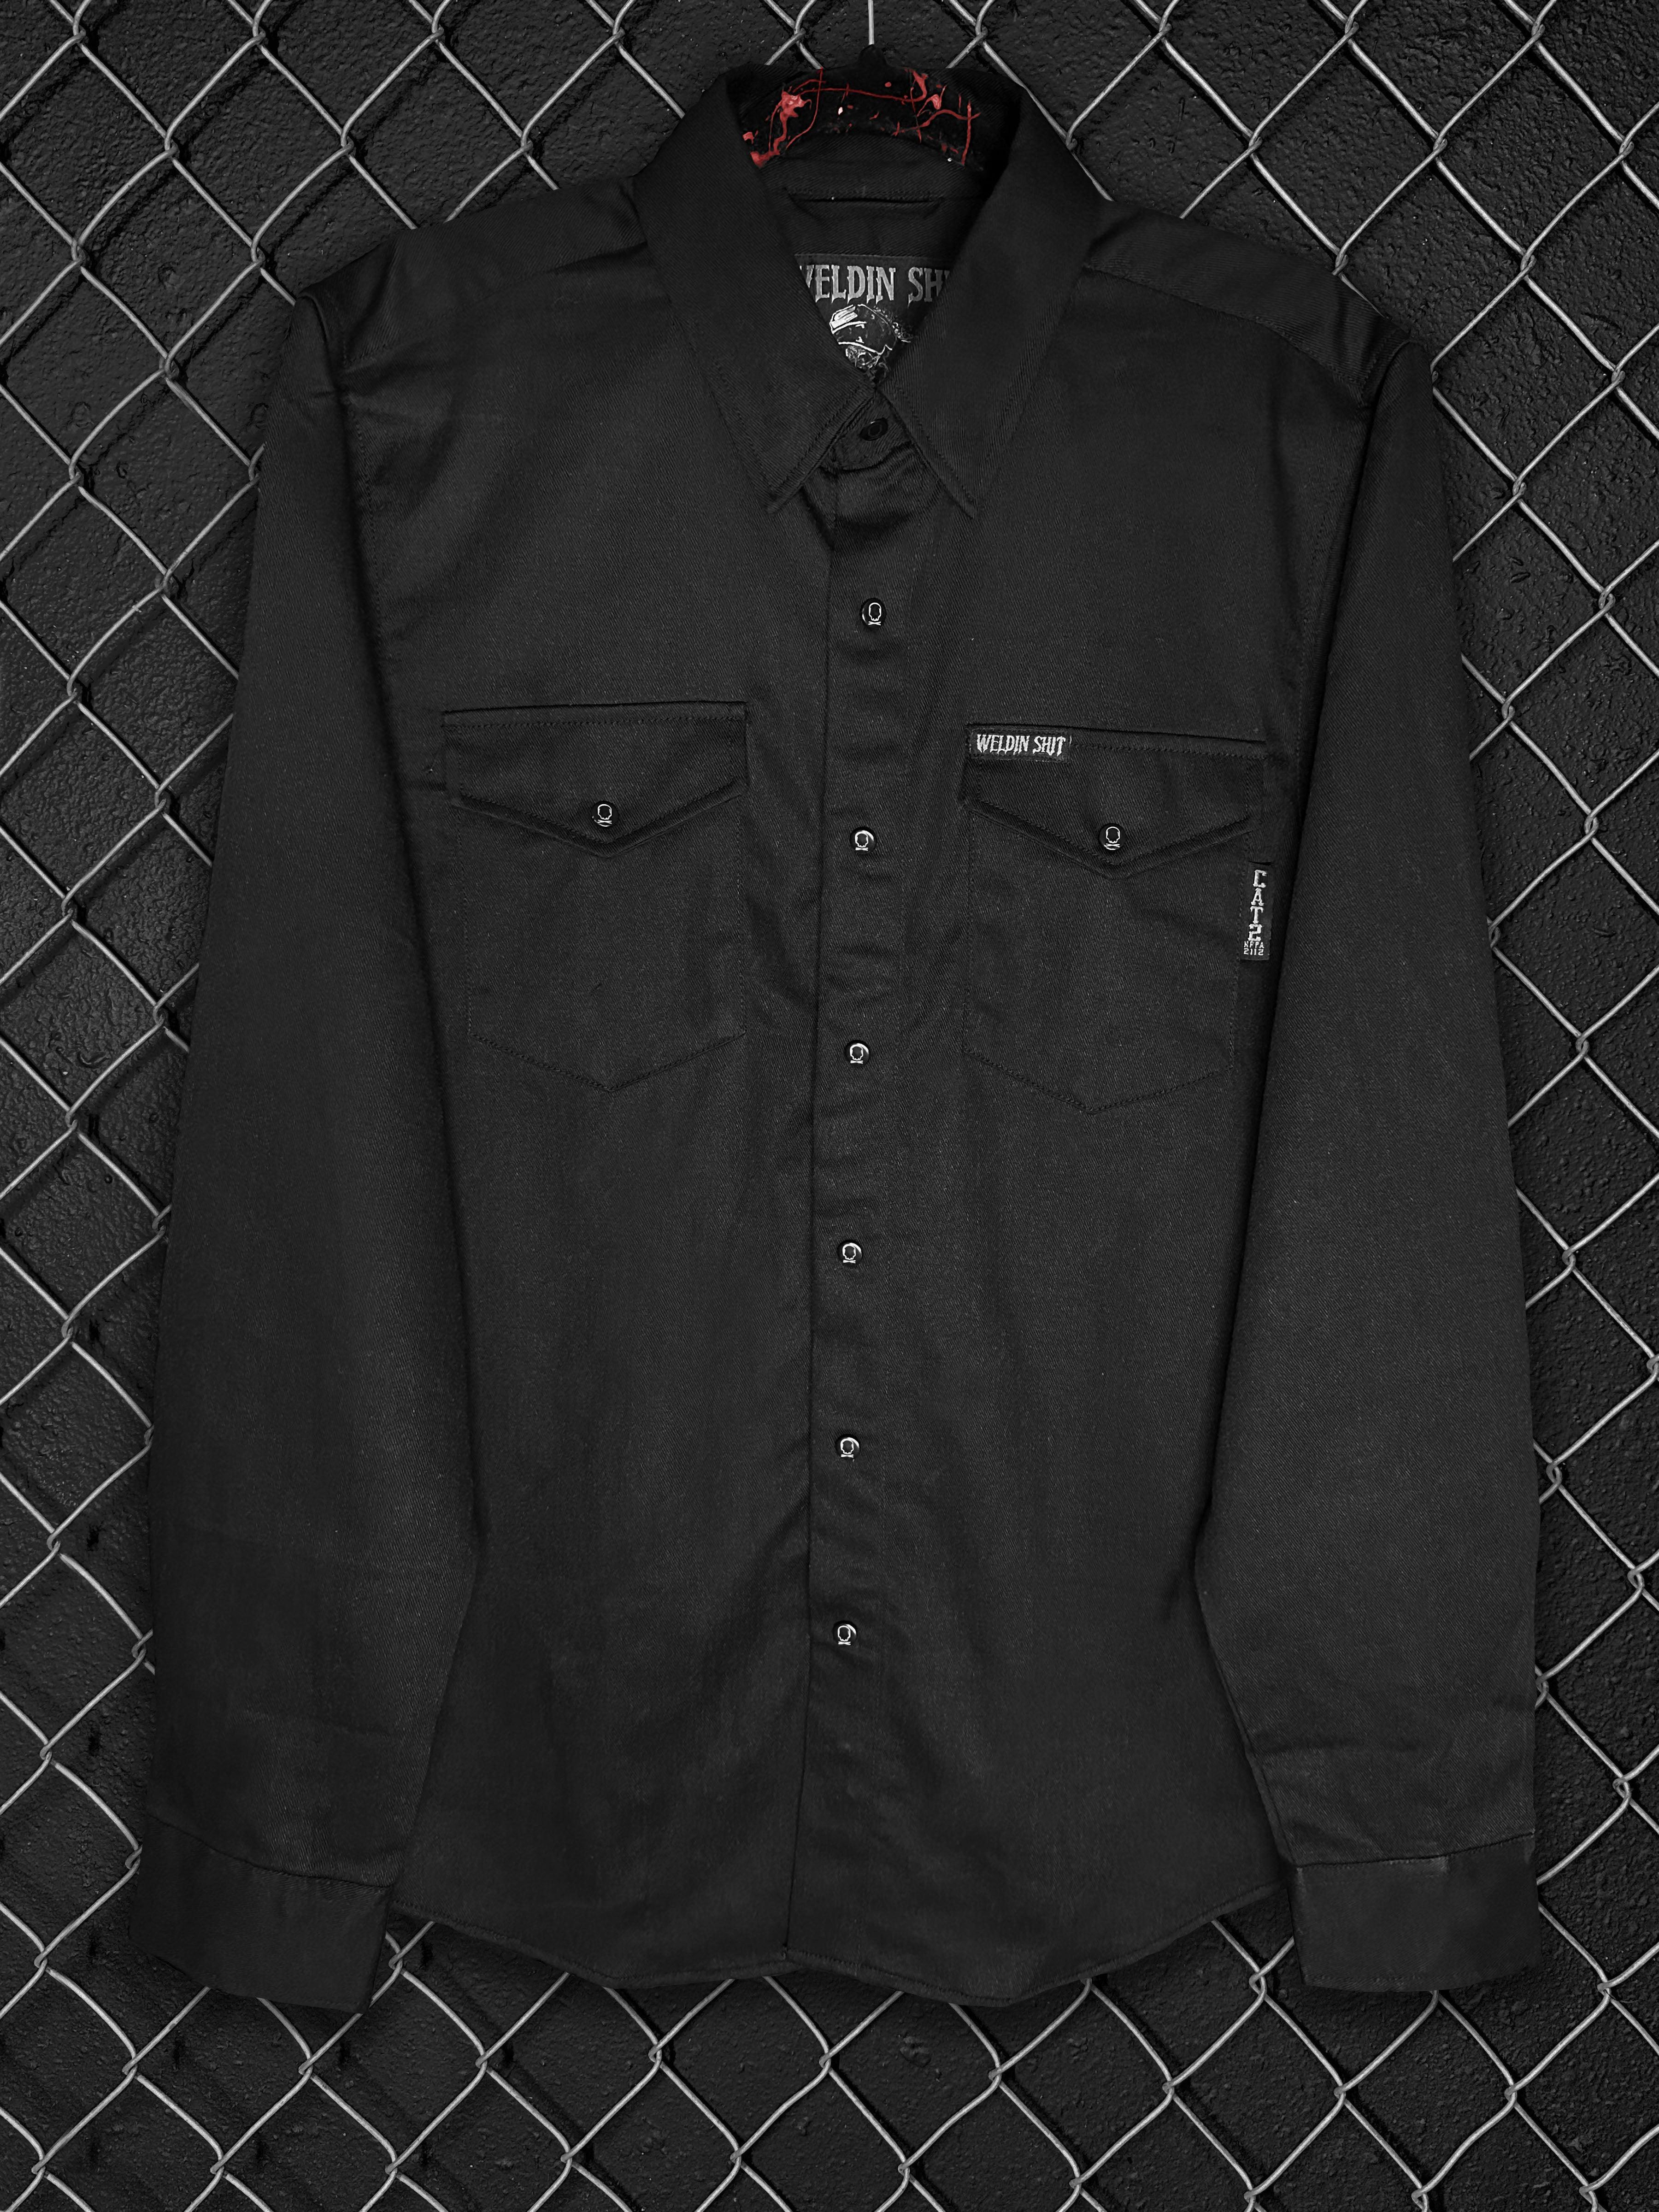 TDC WELDIN SHIT BLACK FR FLANNEL - The Drive Clothing